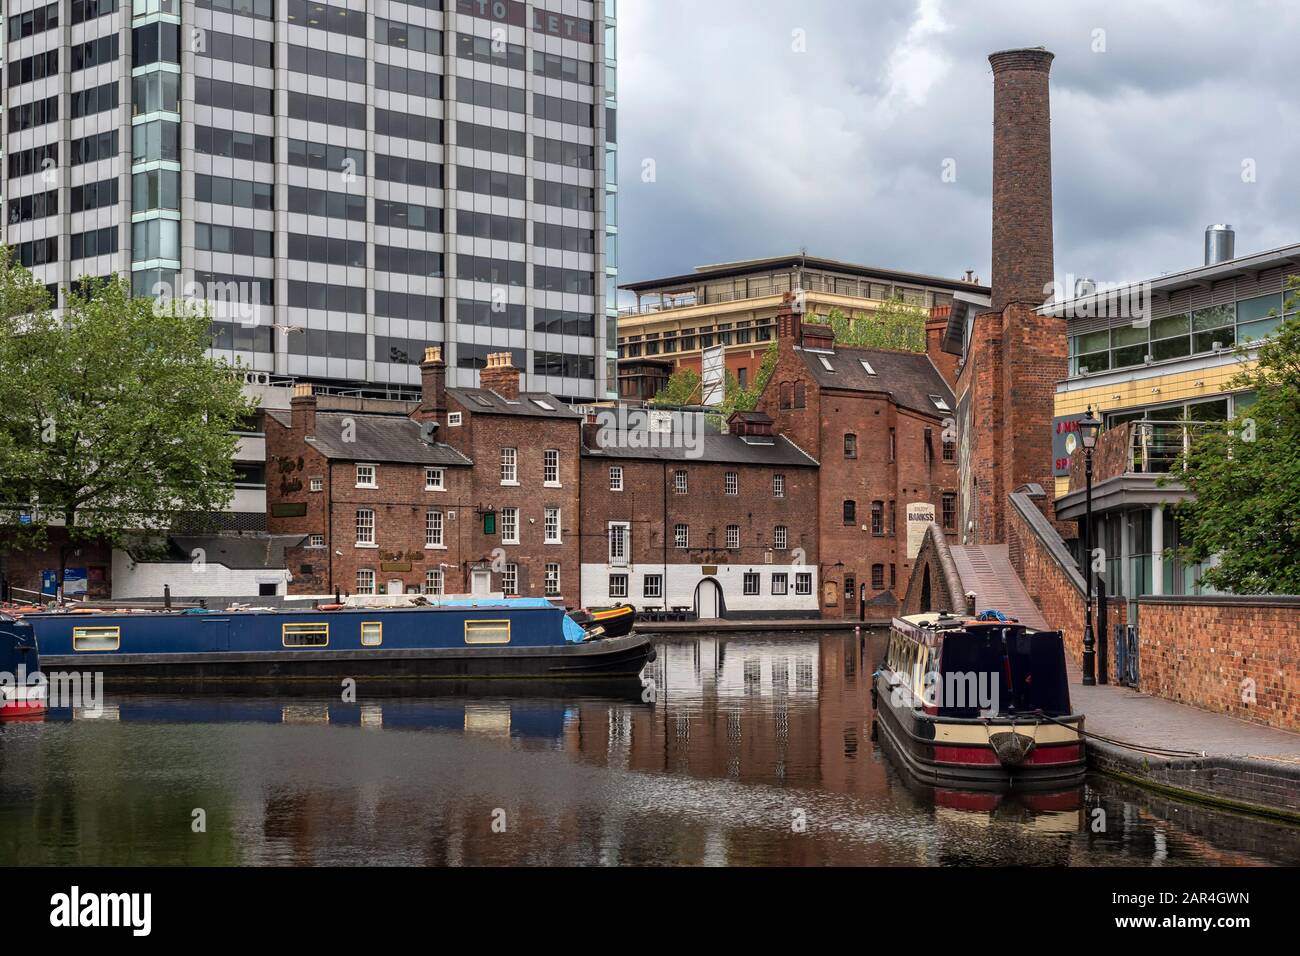 BIRMINGHAM, UK - MAY 28, 2019:  Narrowboats on the canal at Brindley Place surrounded by restored Victorian building and modern office buildings Stock Photo